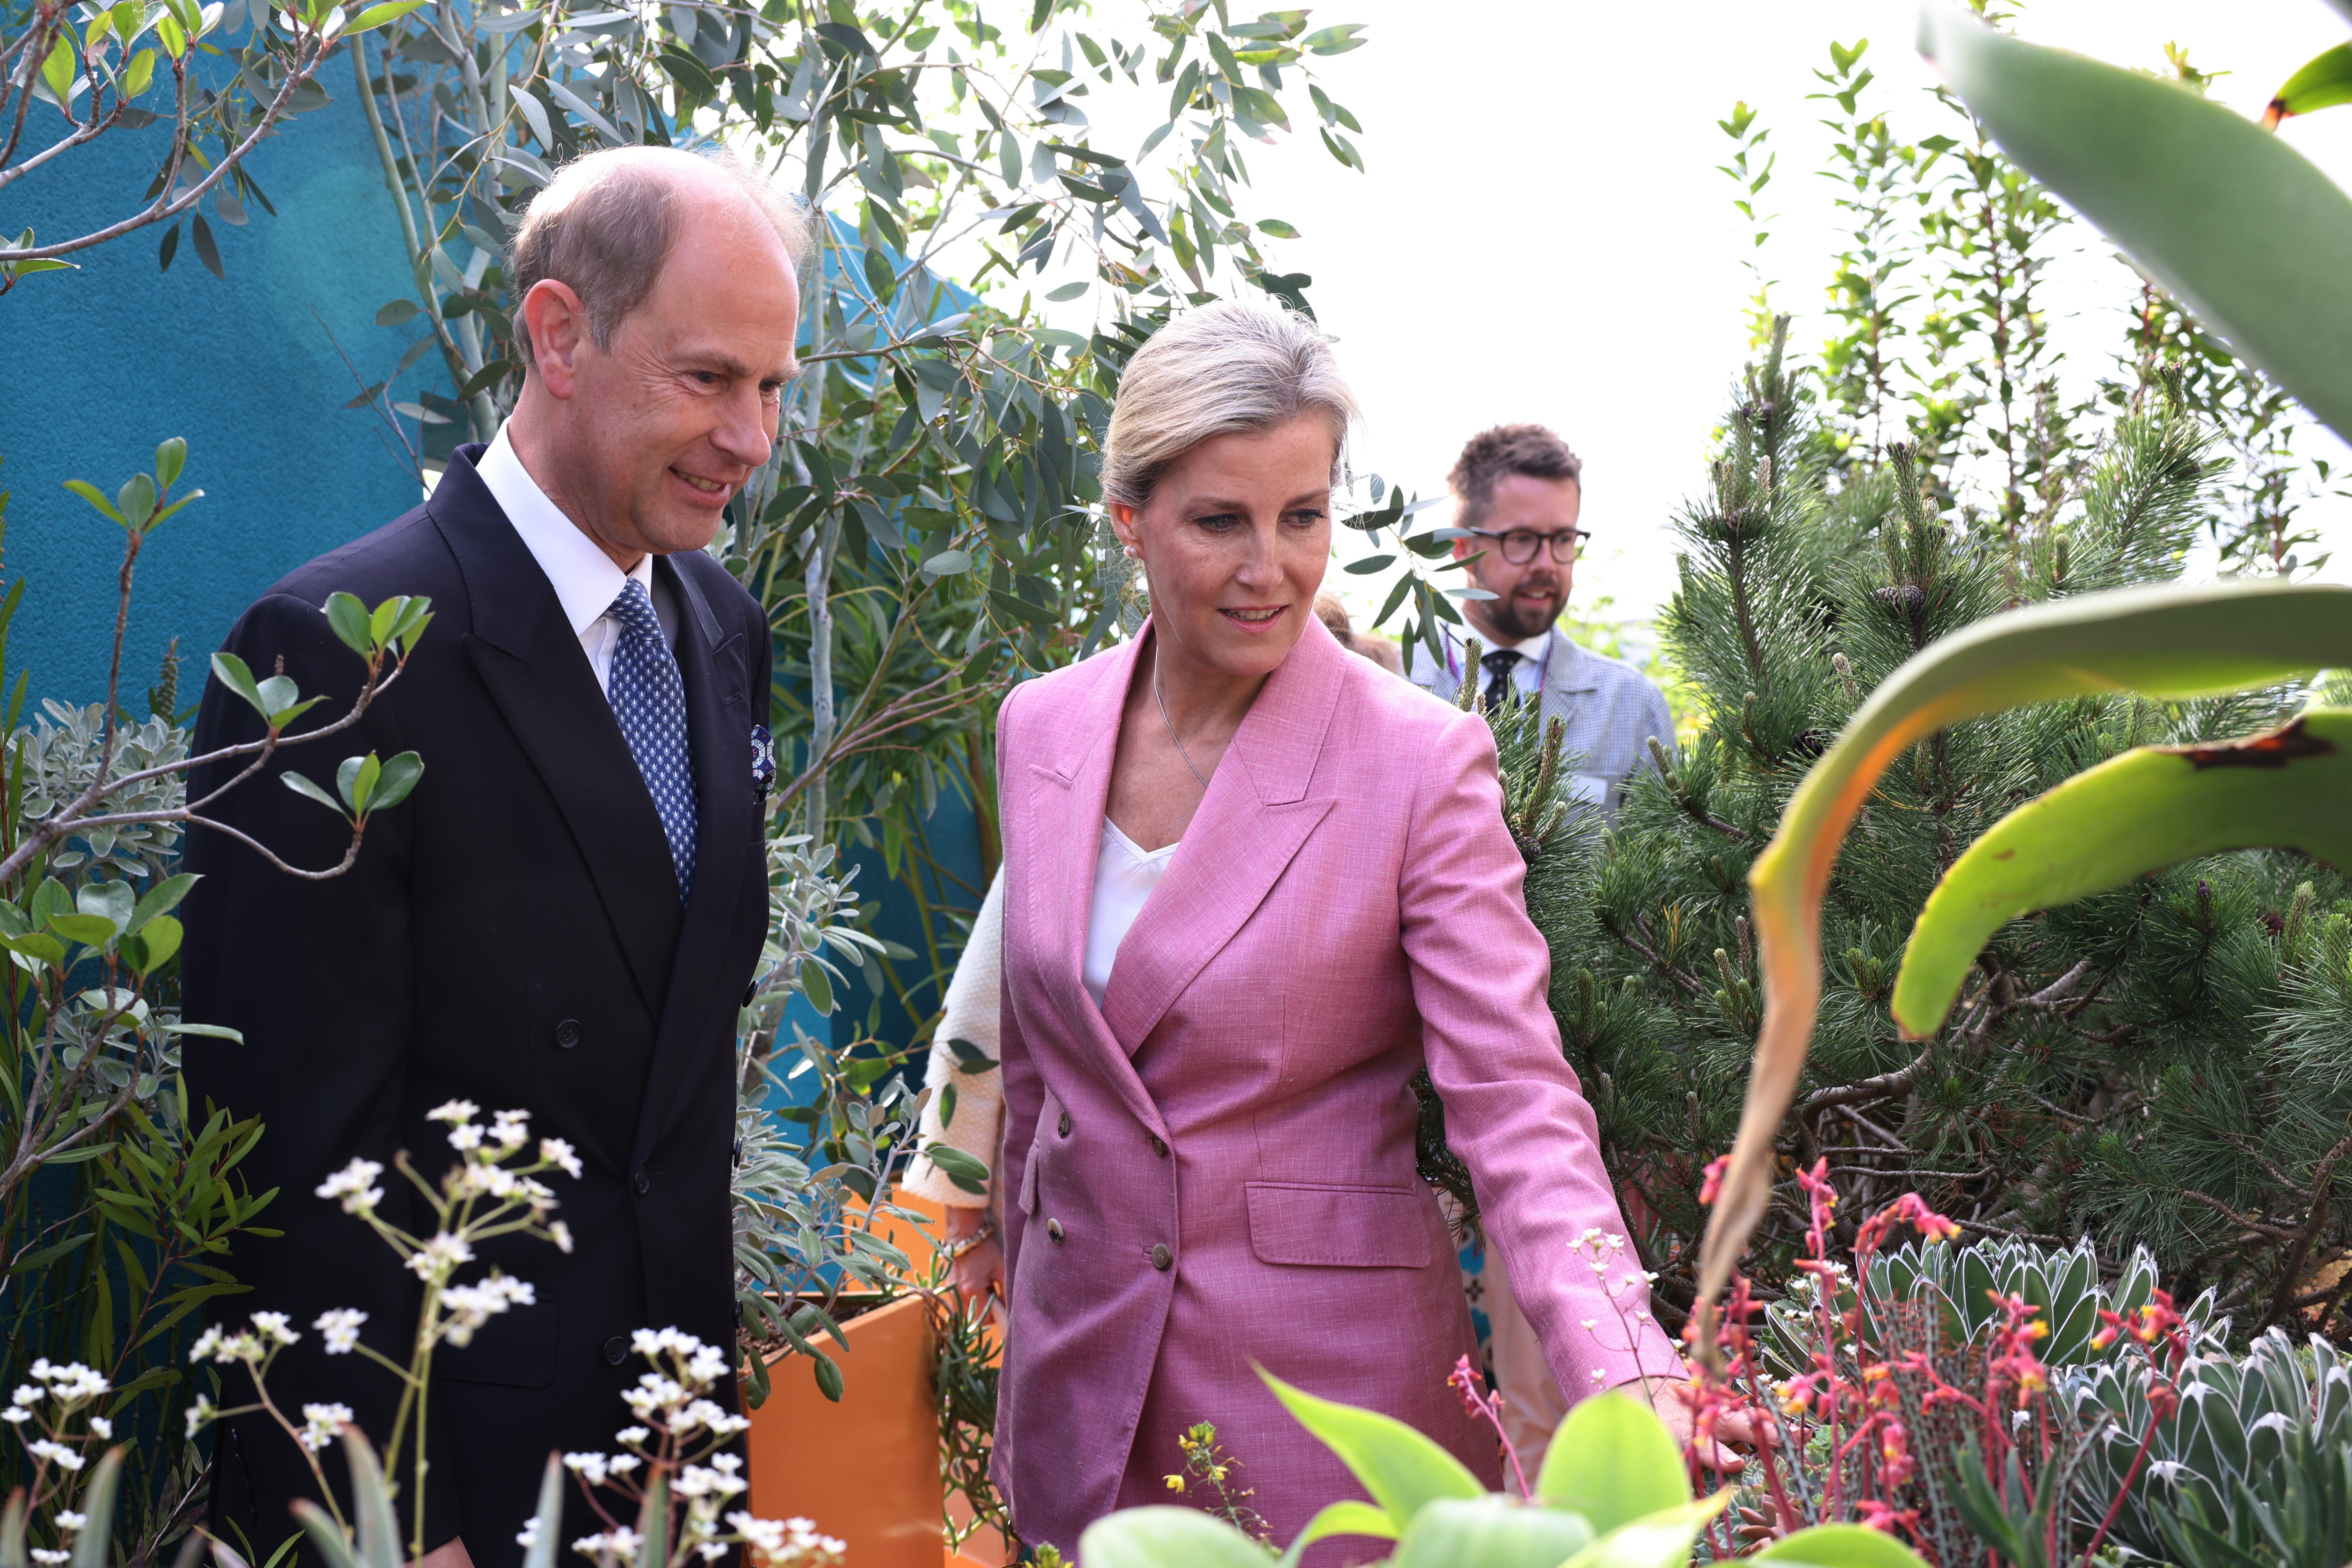 Prince Edward, Earl of Wessex and Sophie, Countess of Wessex at The Chelsea Flower Show on May 23, 2022 | Source: Getty Images